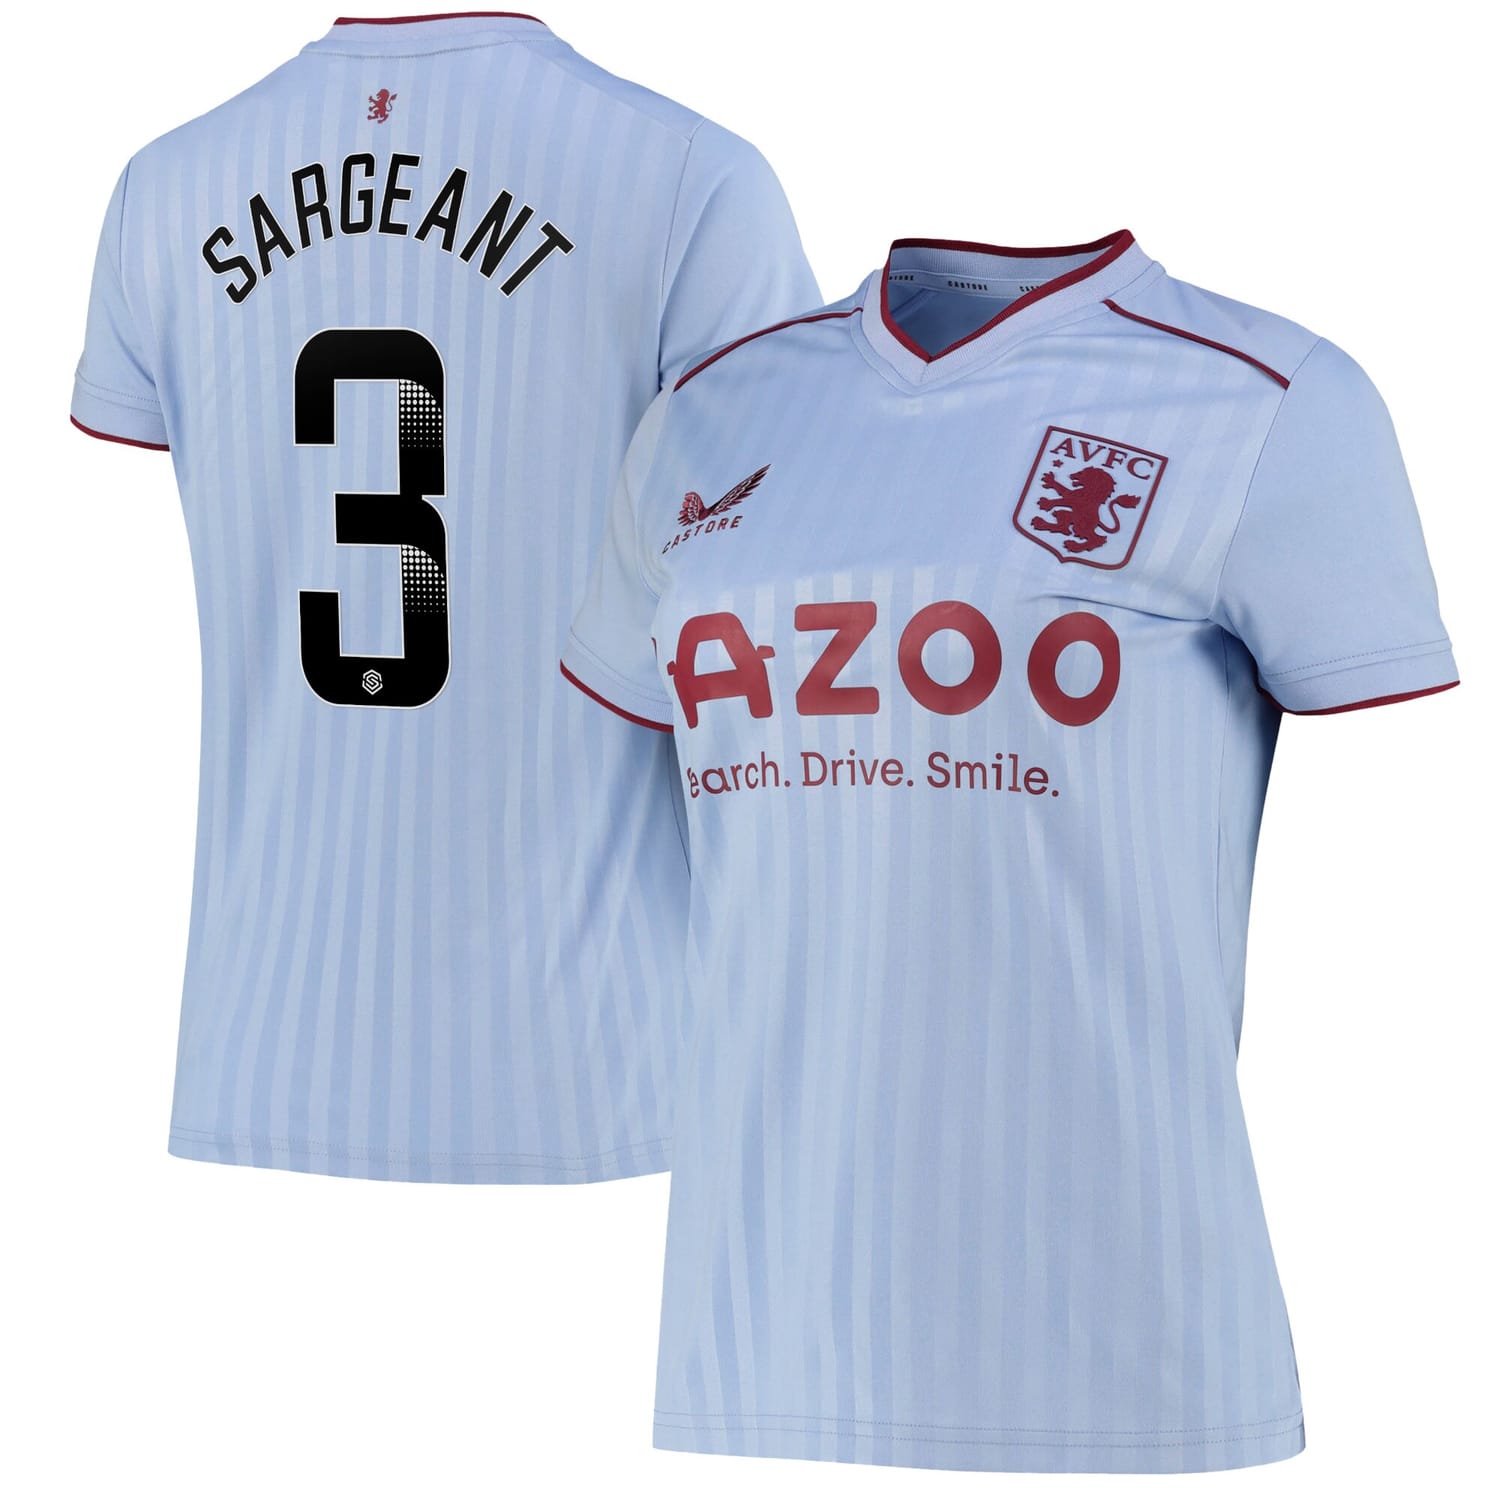 Premier League Aston Villa Away WSL Jersey Shirt 2022-23 player Meaghan Sargeant 3 printing for Women